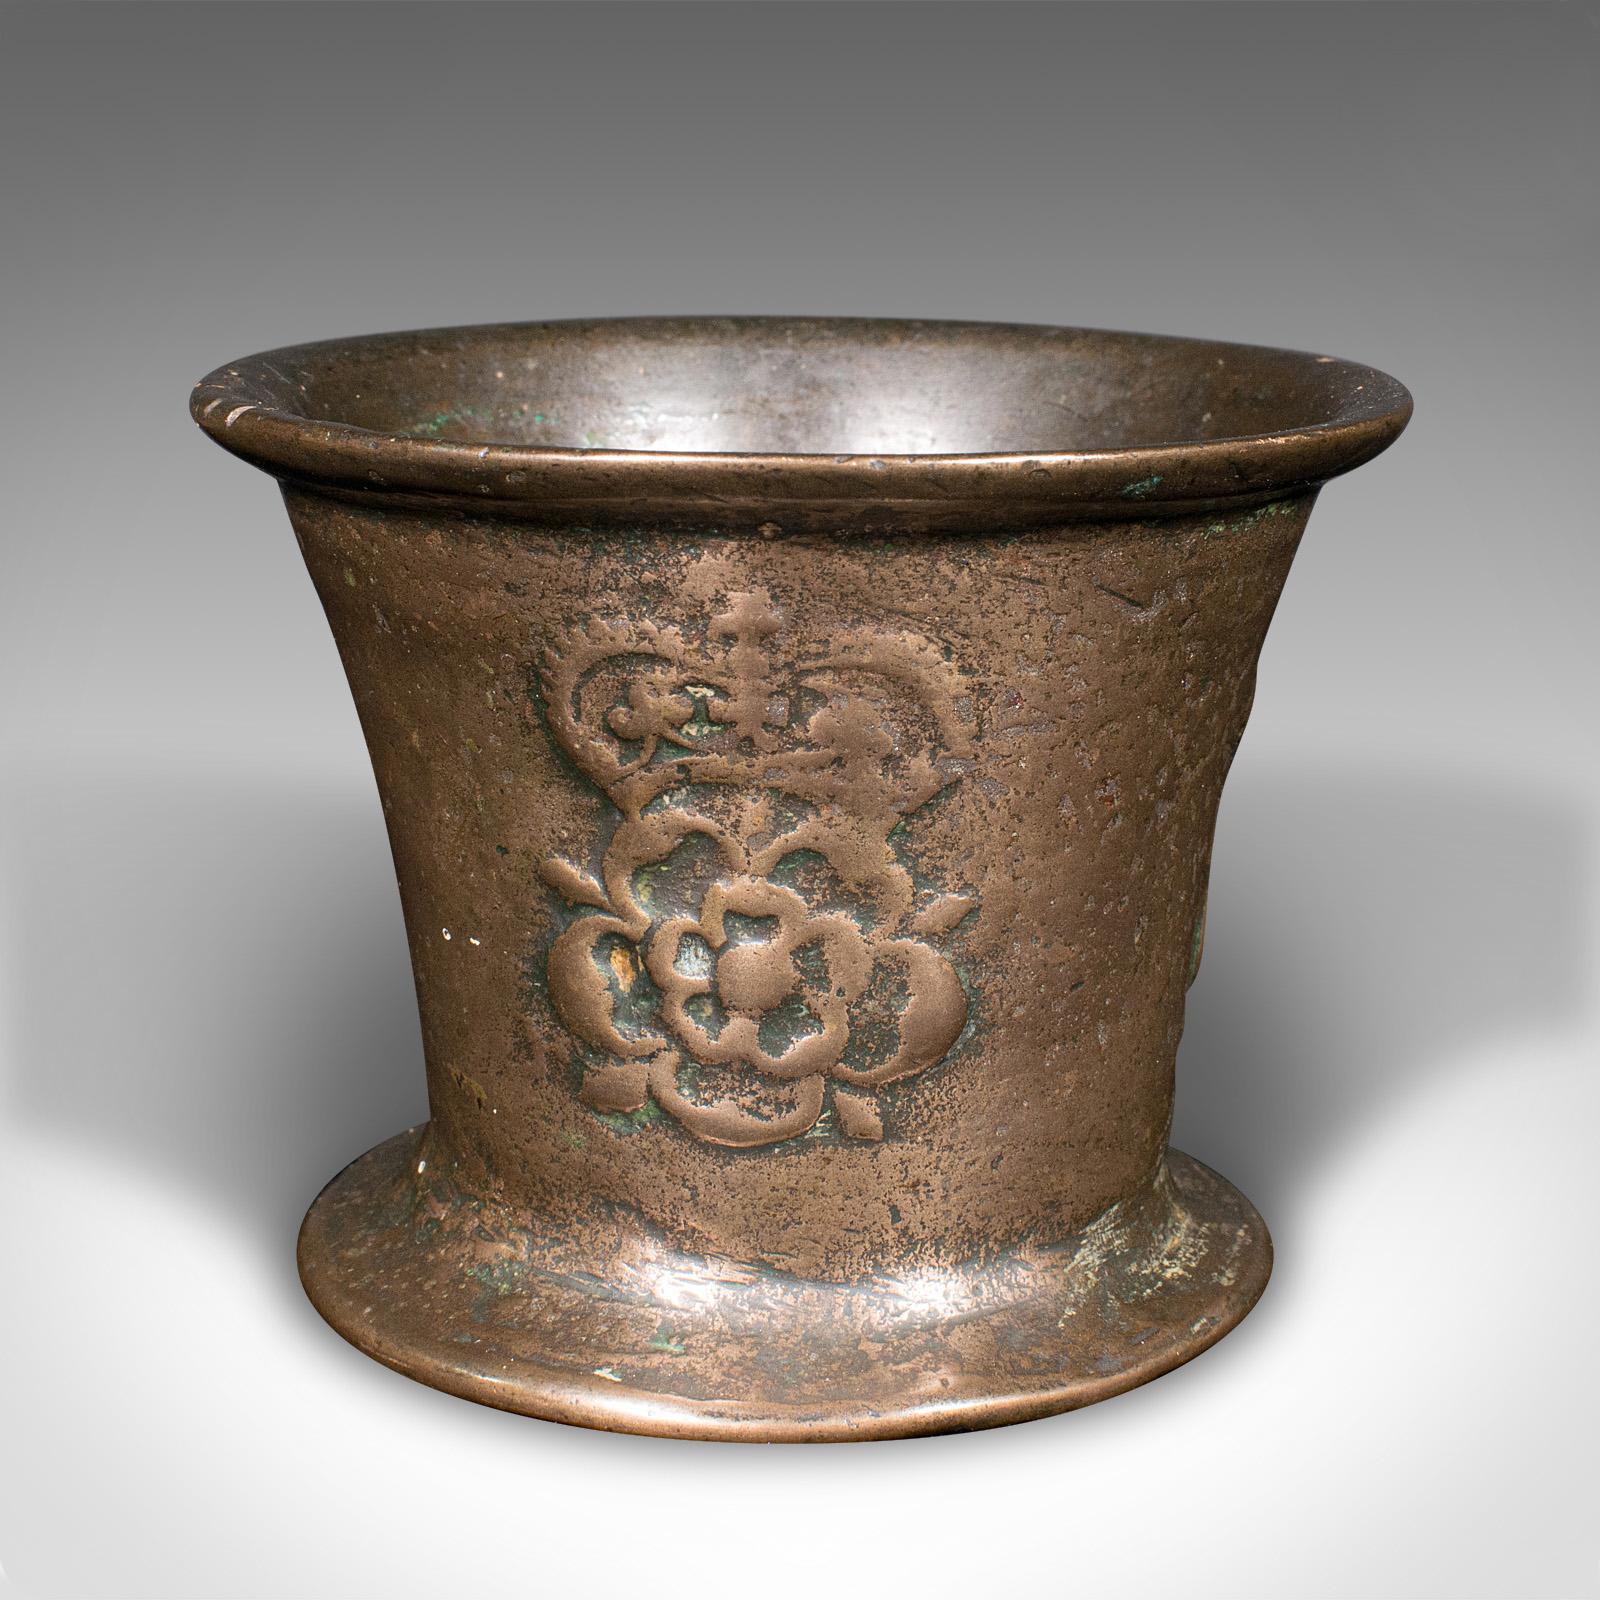 Antique Tudor Rose Mortar And Pestle, English, Bronze, Apothecary, 17th Century For Sale 2